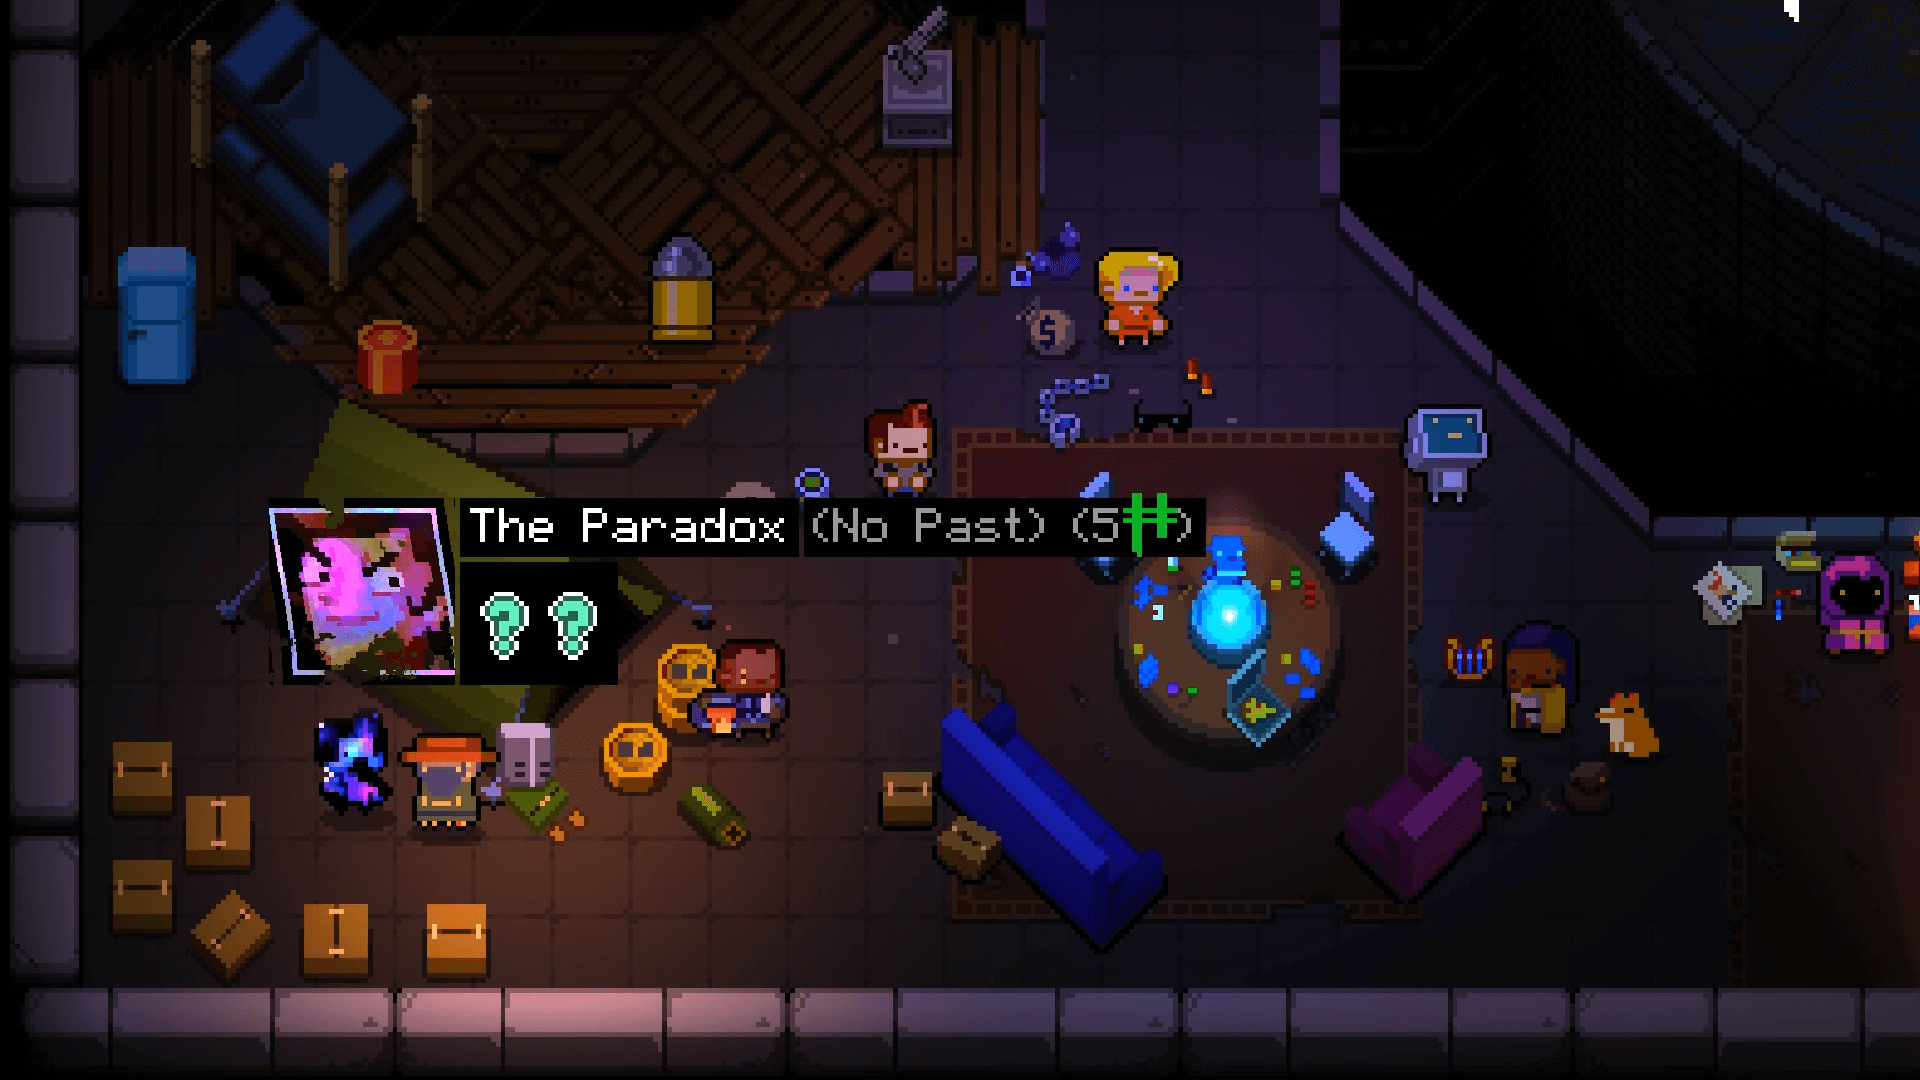 http://www.cosmocover.com/wp-content/uploads/2019/03/Enter-the-Gungeon-FTA-Screen-5.png